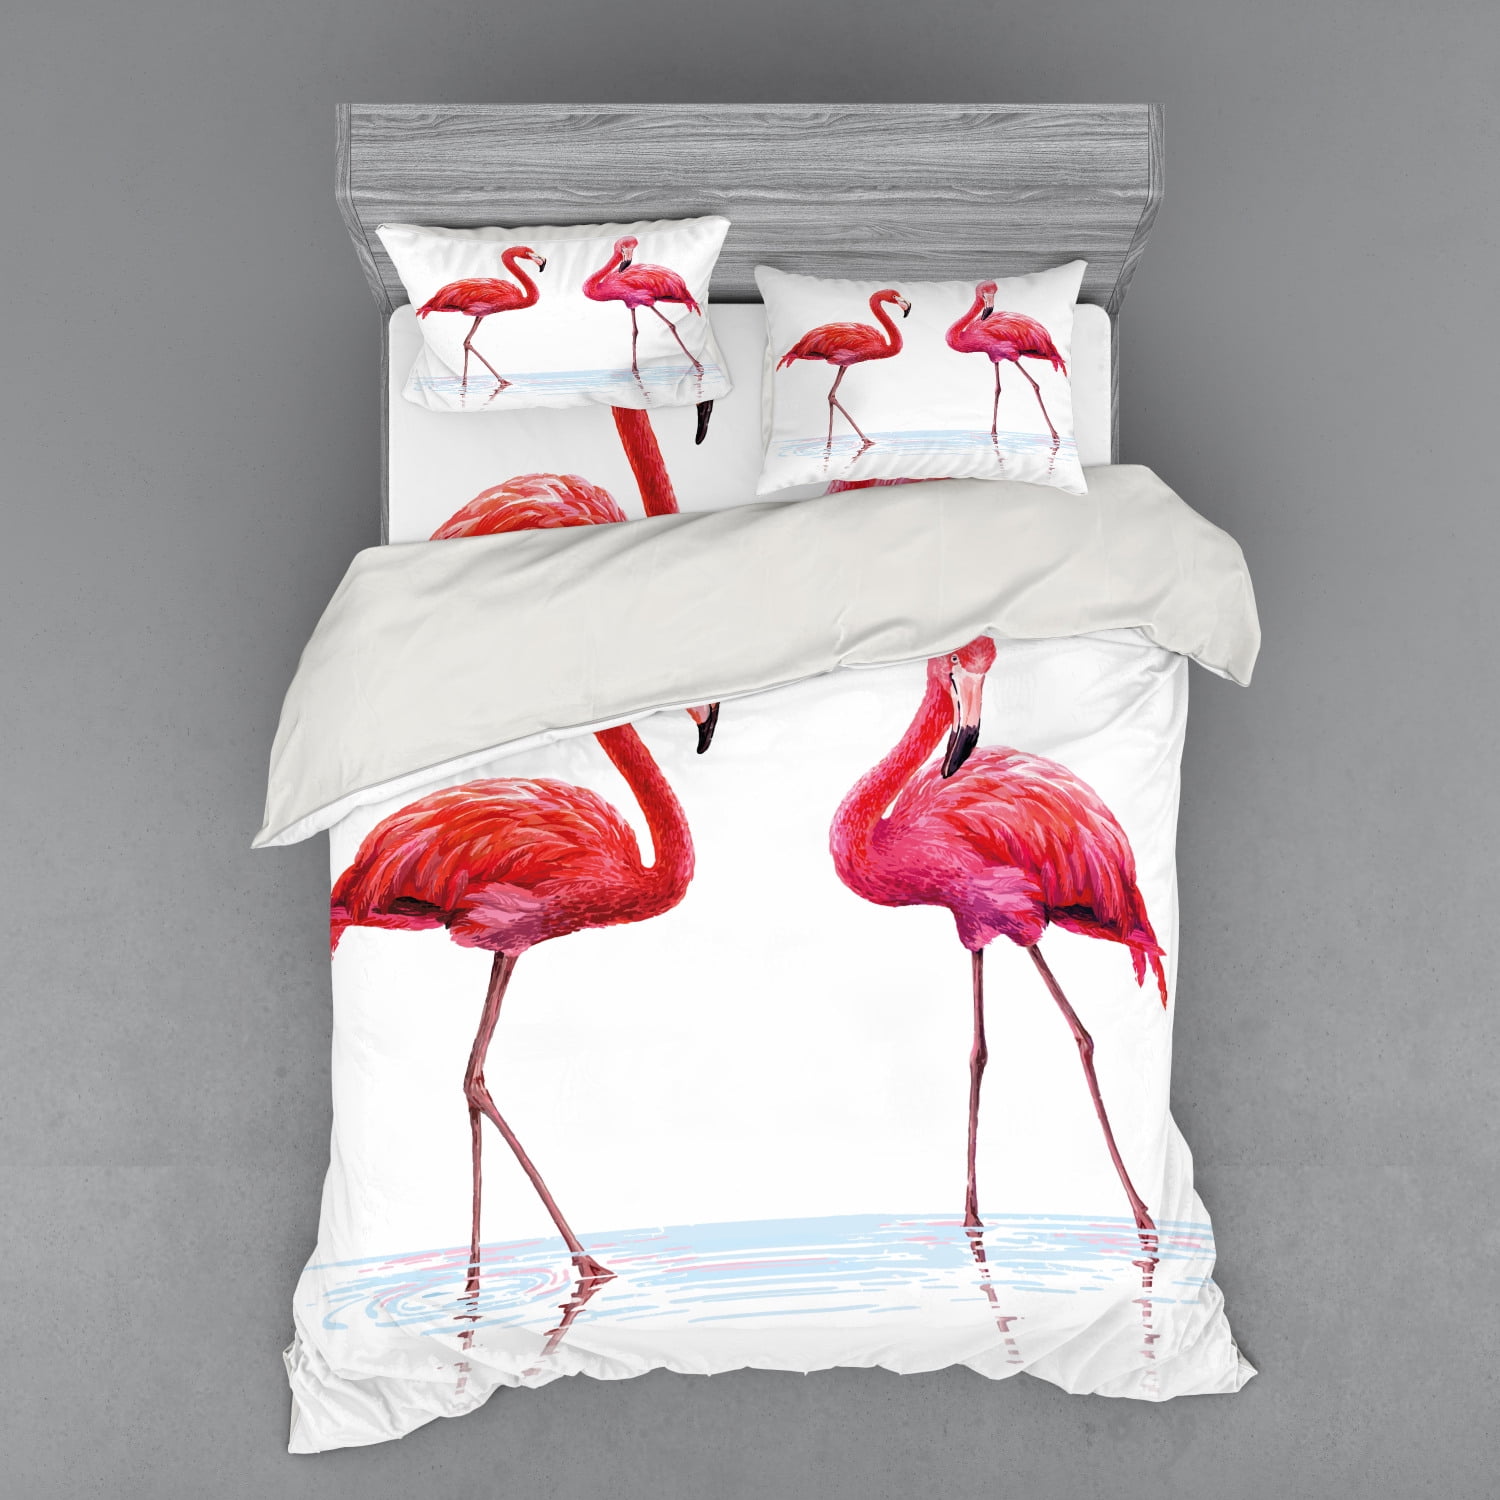 Animal Duvet Cover Set, 2 Hand Drawn Flamingos in Pink Colors on Seaside  Tropical Wildlife Artwork, Bedding Set with Shams and Fitted Sheet, 3  Sizes, 